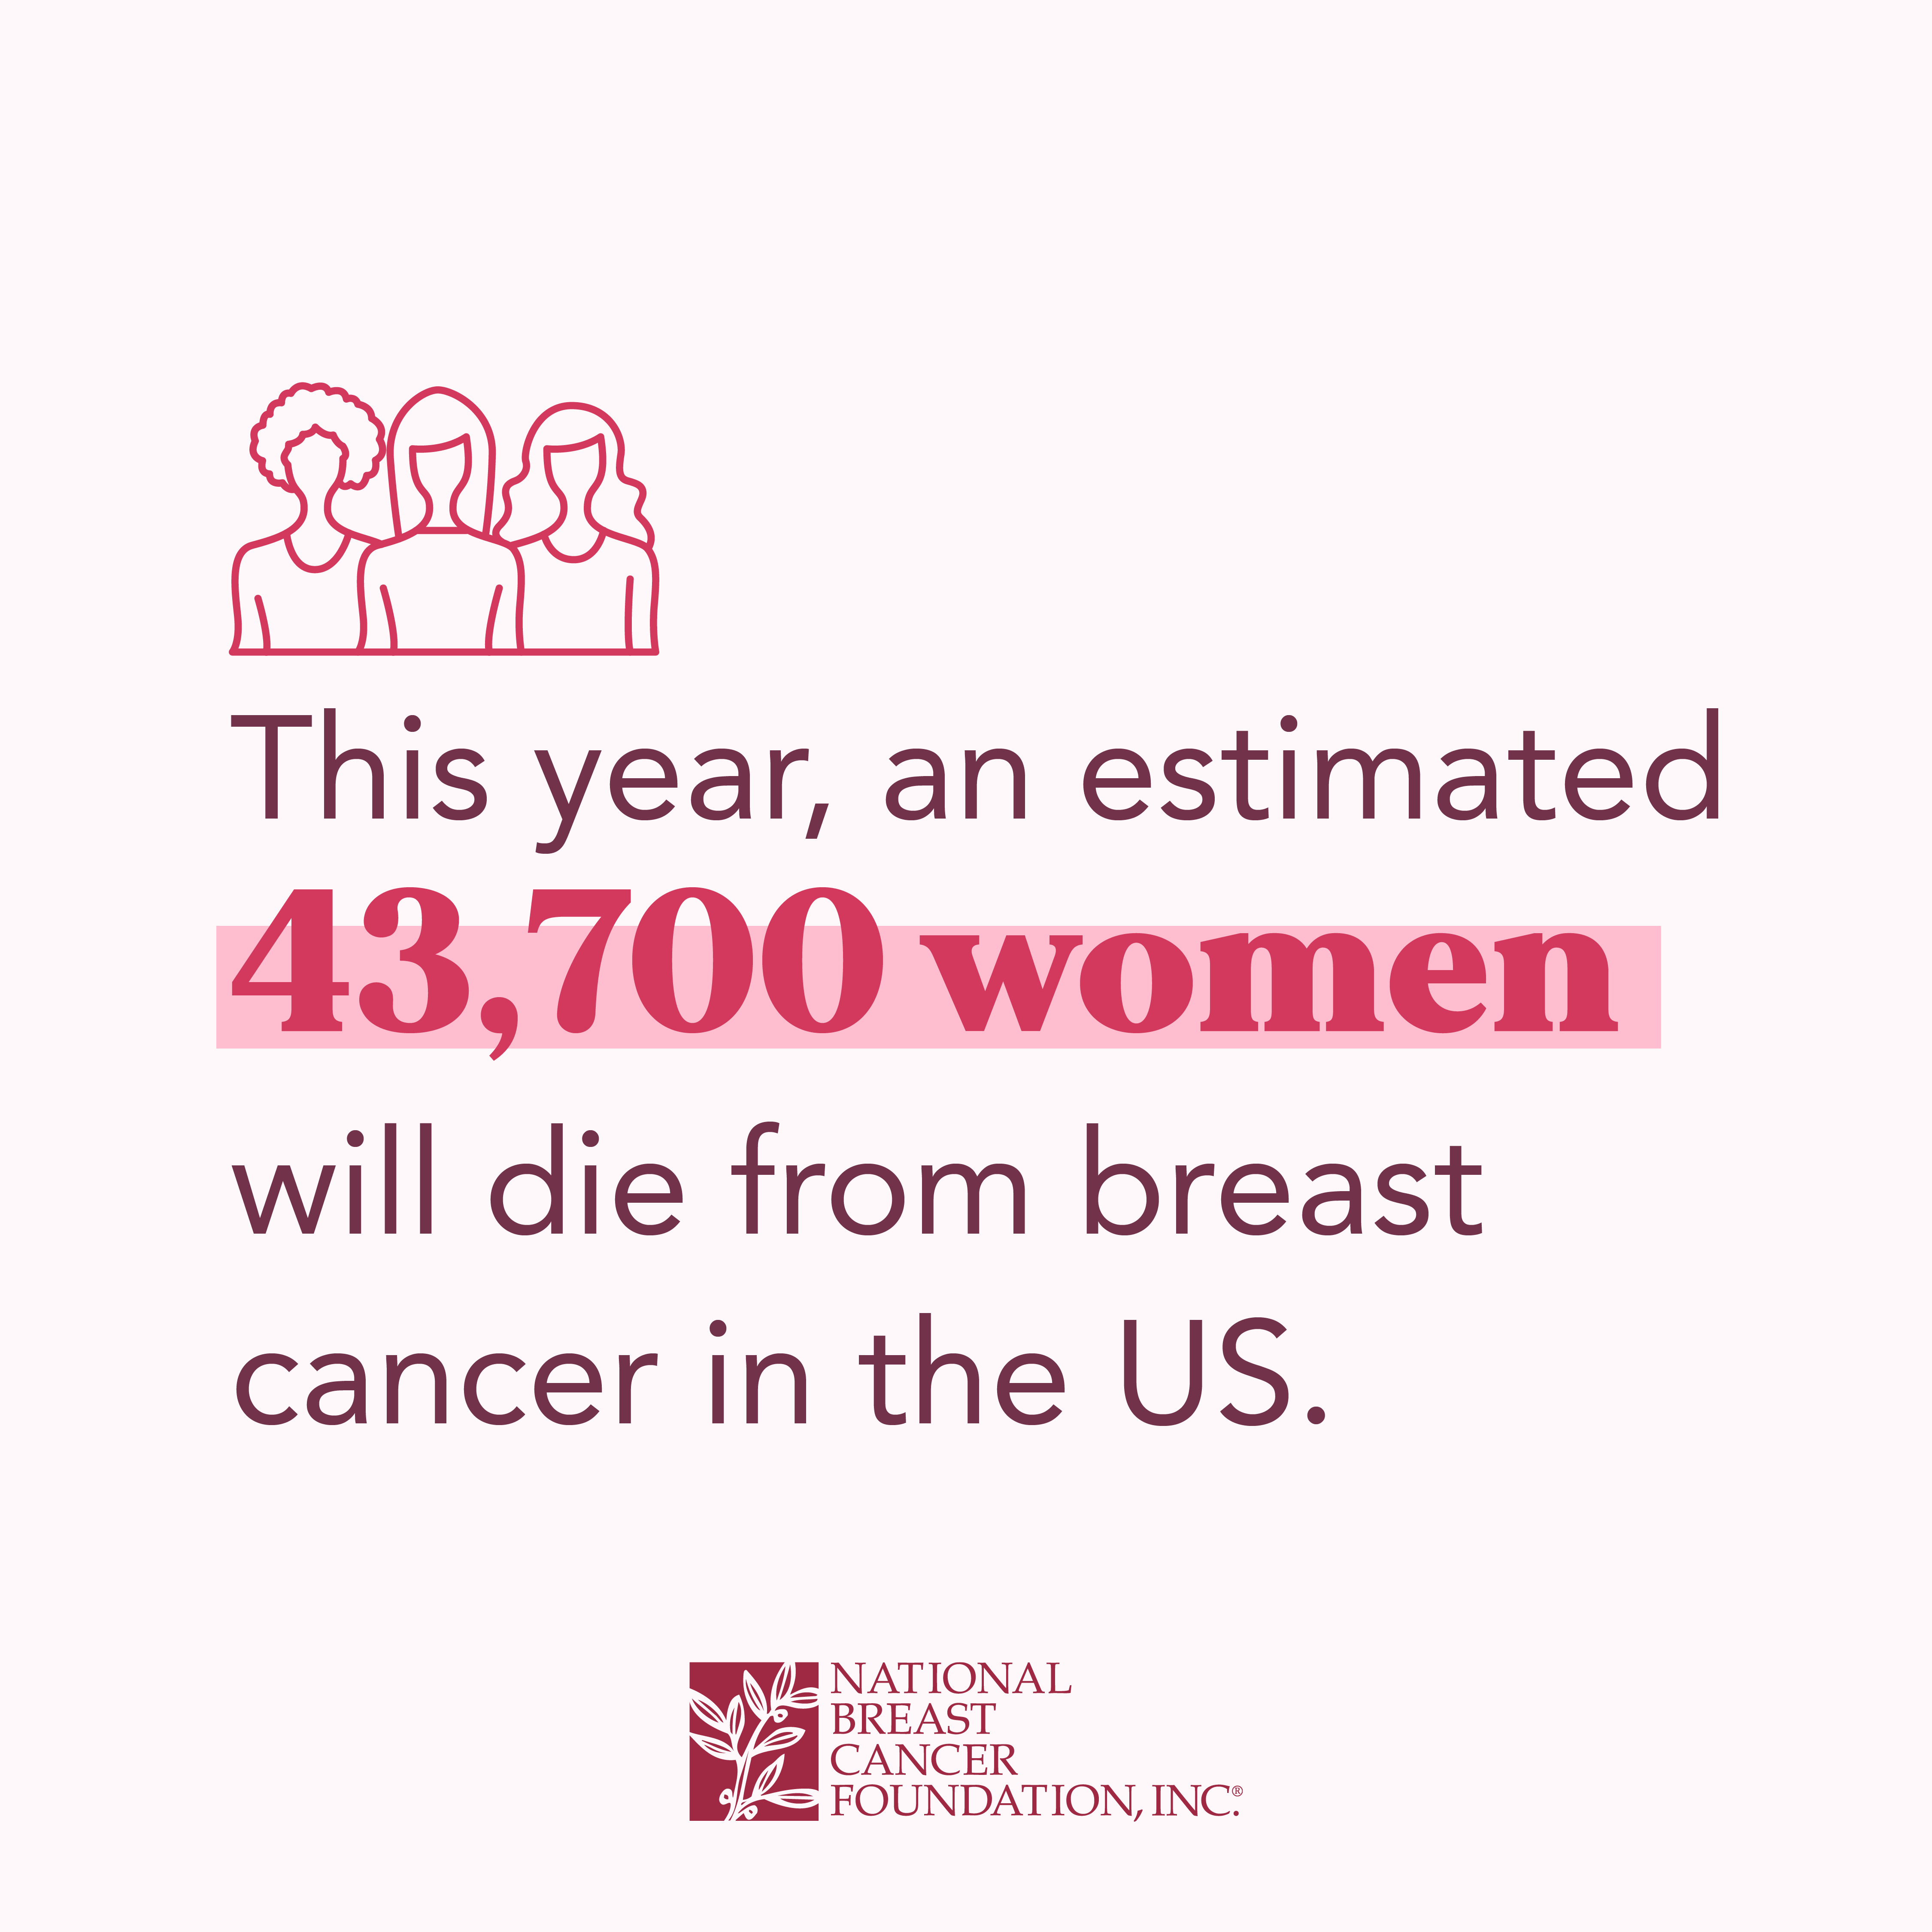 This year, an estimated 43,700 women will die from breast cancer in the U.S.